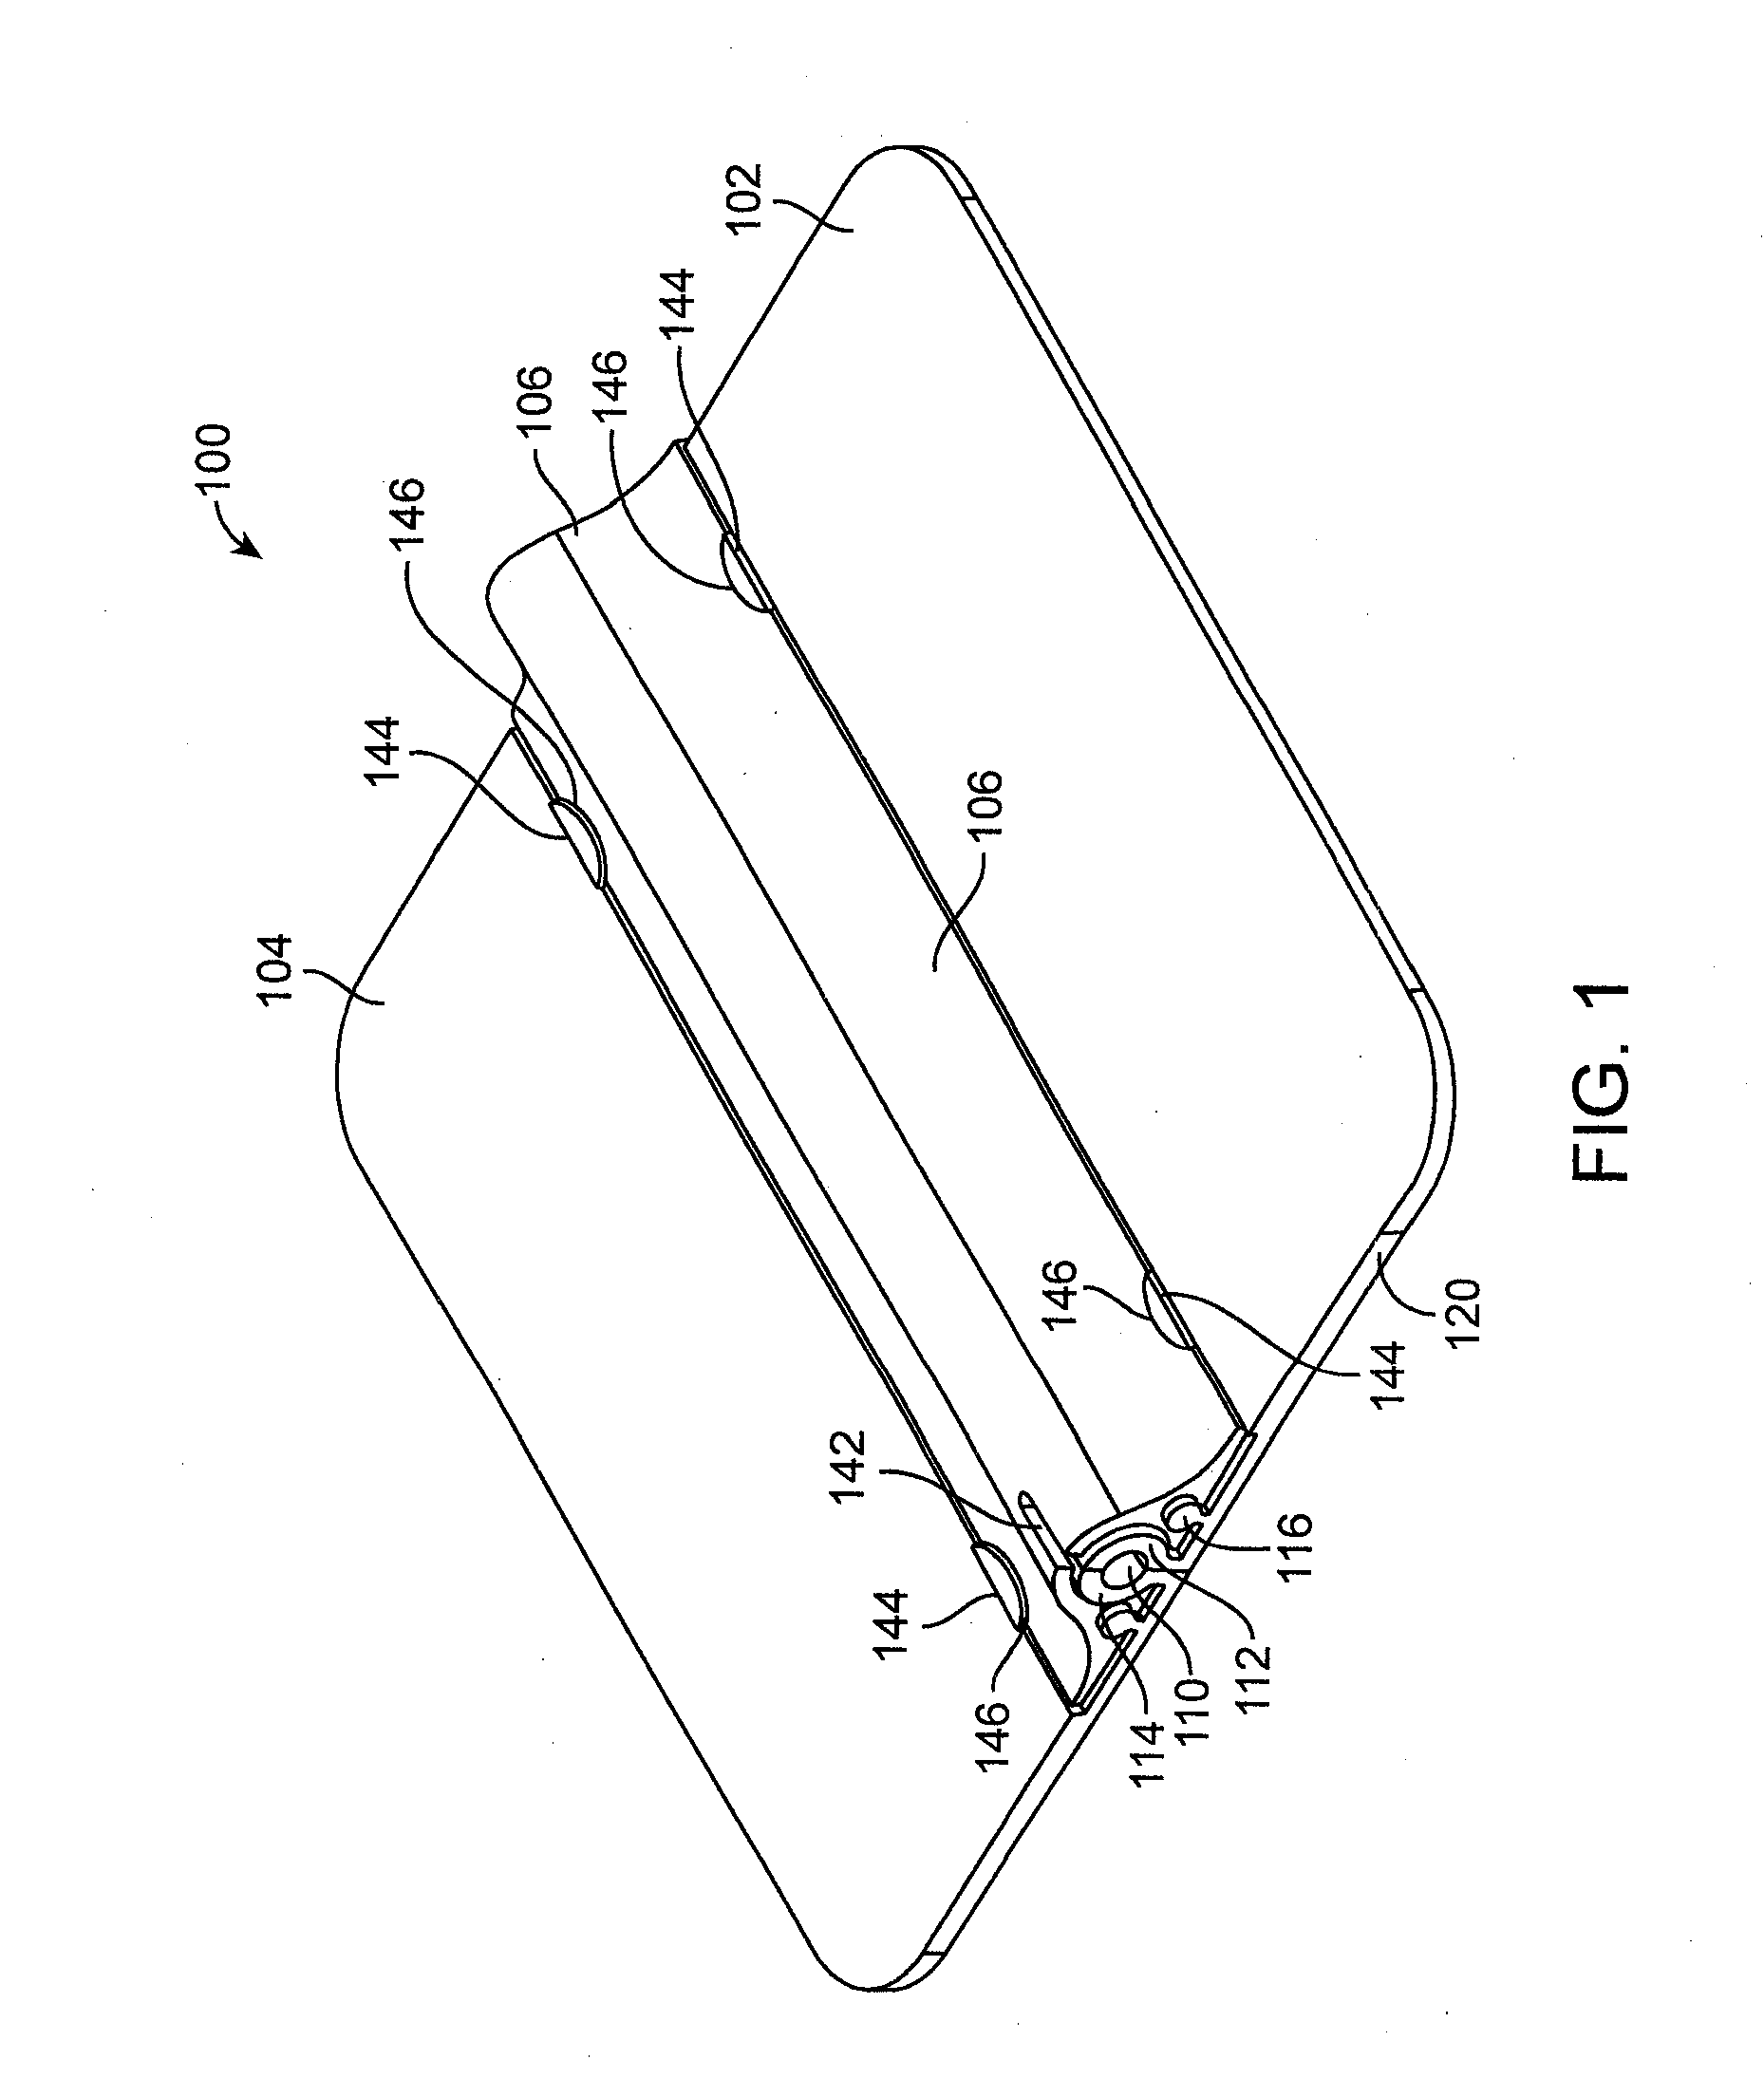 Rapid closing surgical closure device